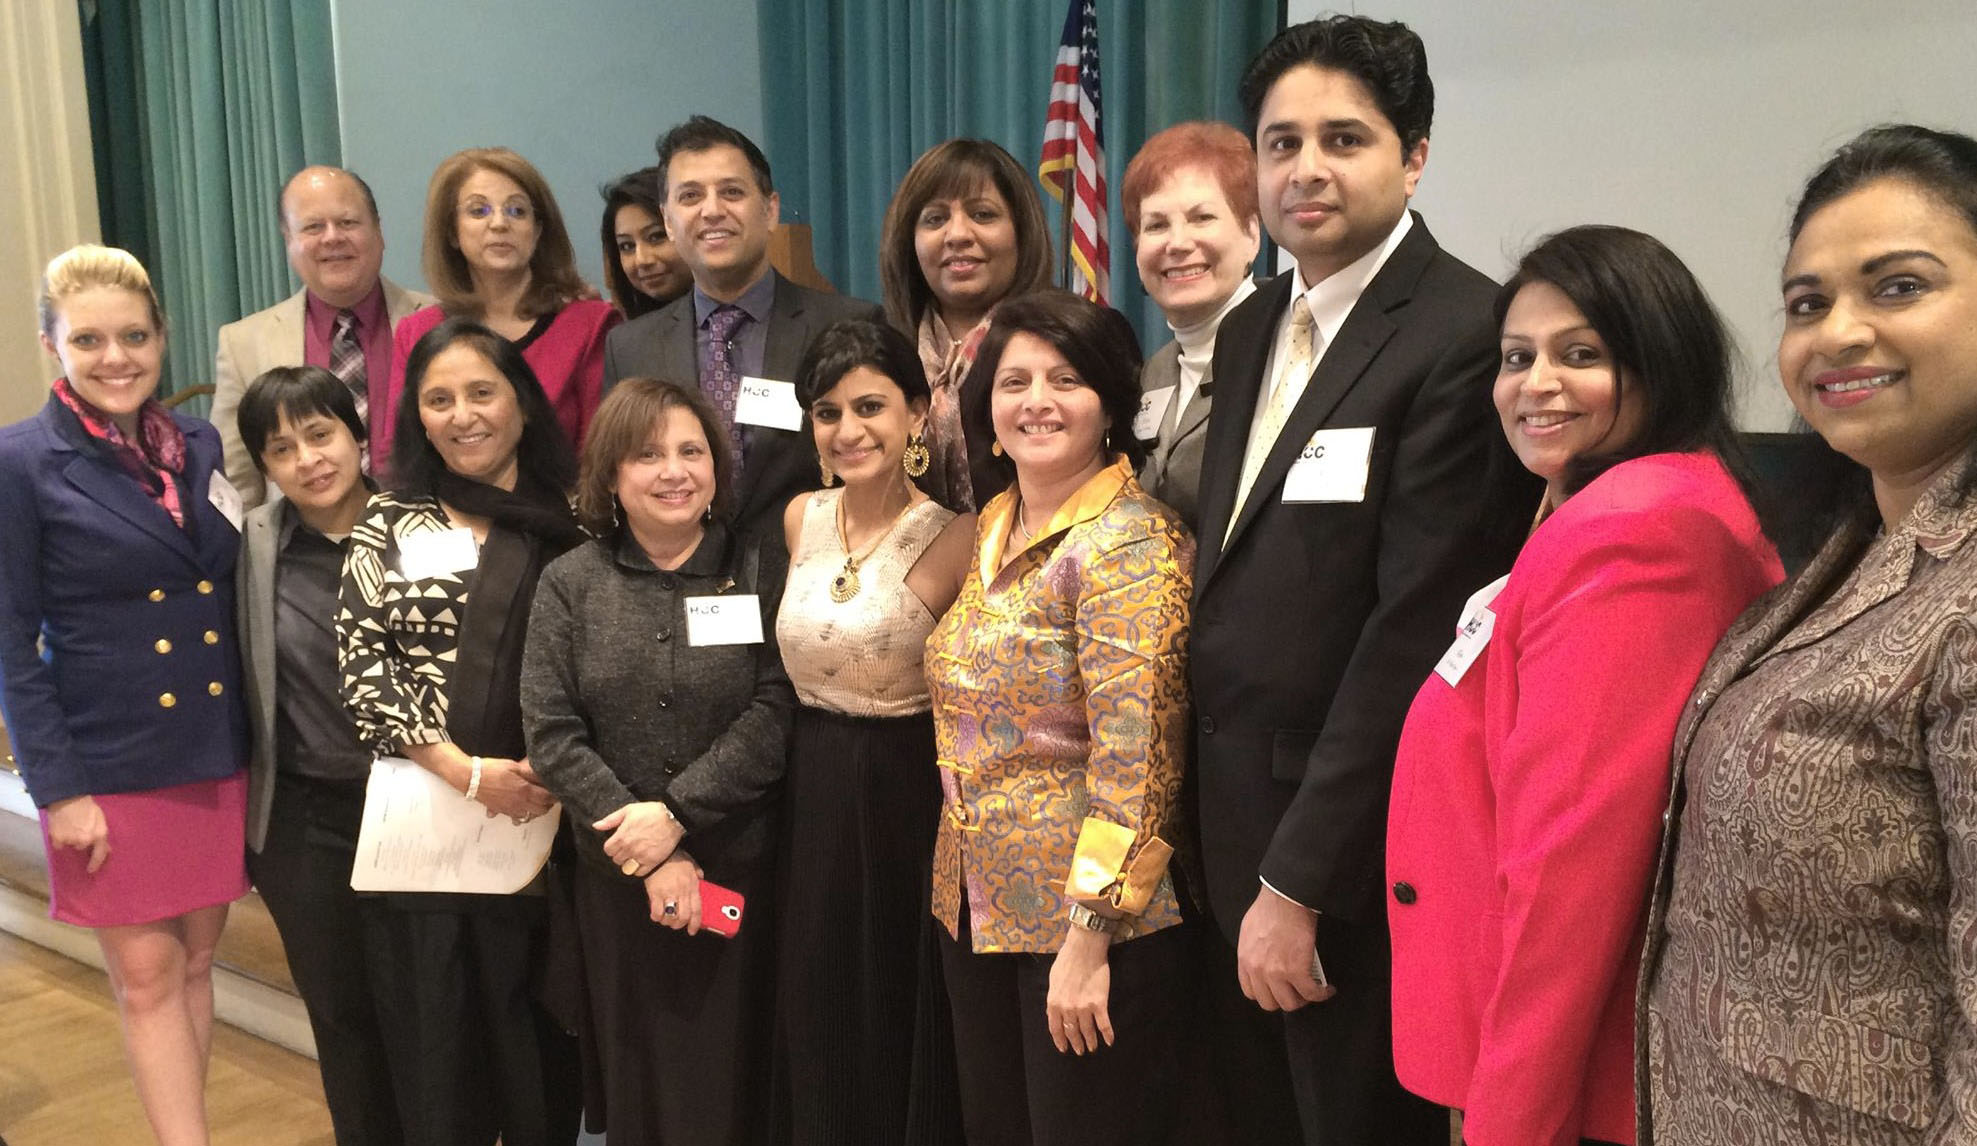 HCC-District VII Trustee Neeta Sane and HCC-ASPIRE volunteers plan for the May 4 Awards Ceremony to honor the Hon. Mayor Sylvester Turner and others.  